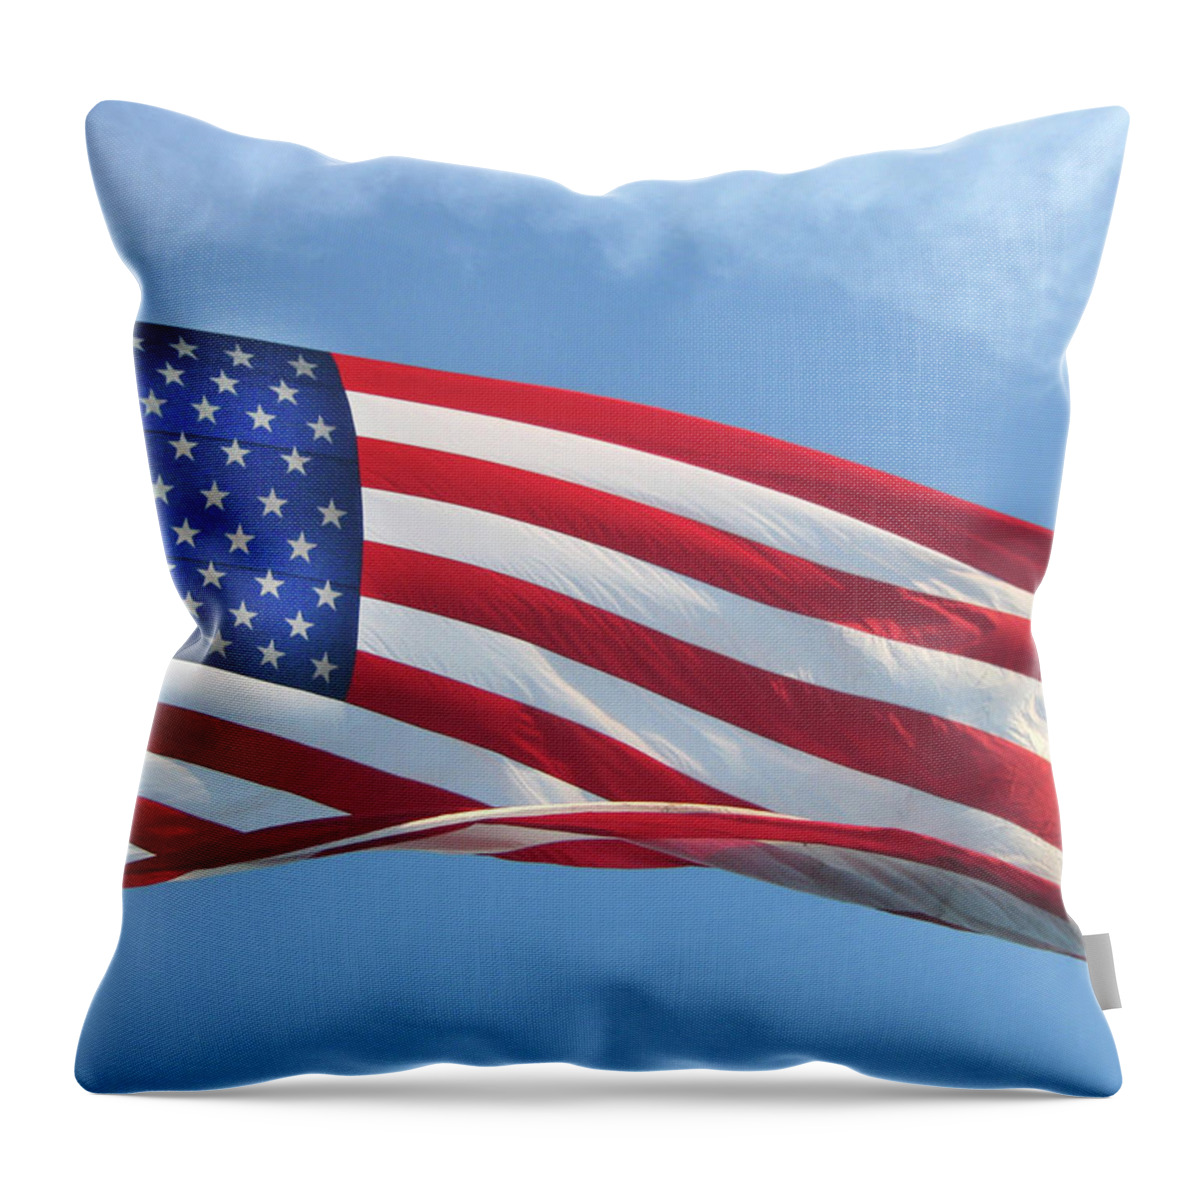 Old Glory Throw Pillow featuring the digital art Old Glory Never Fades by Gary Baird